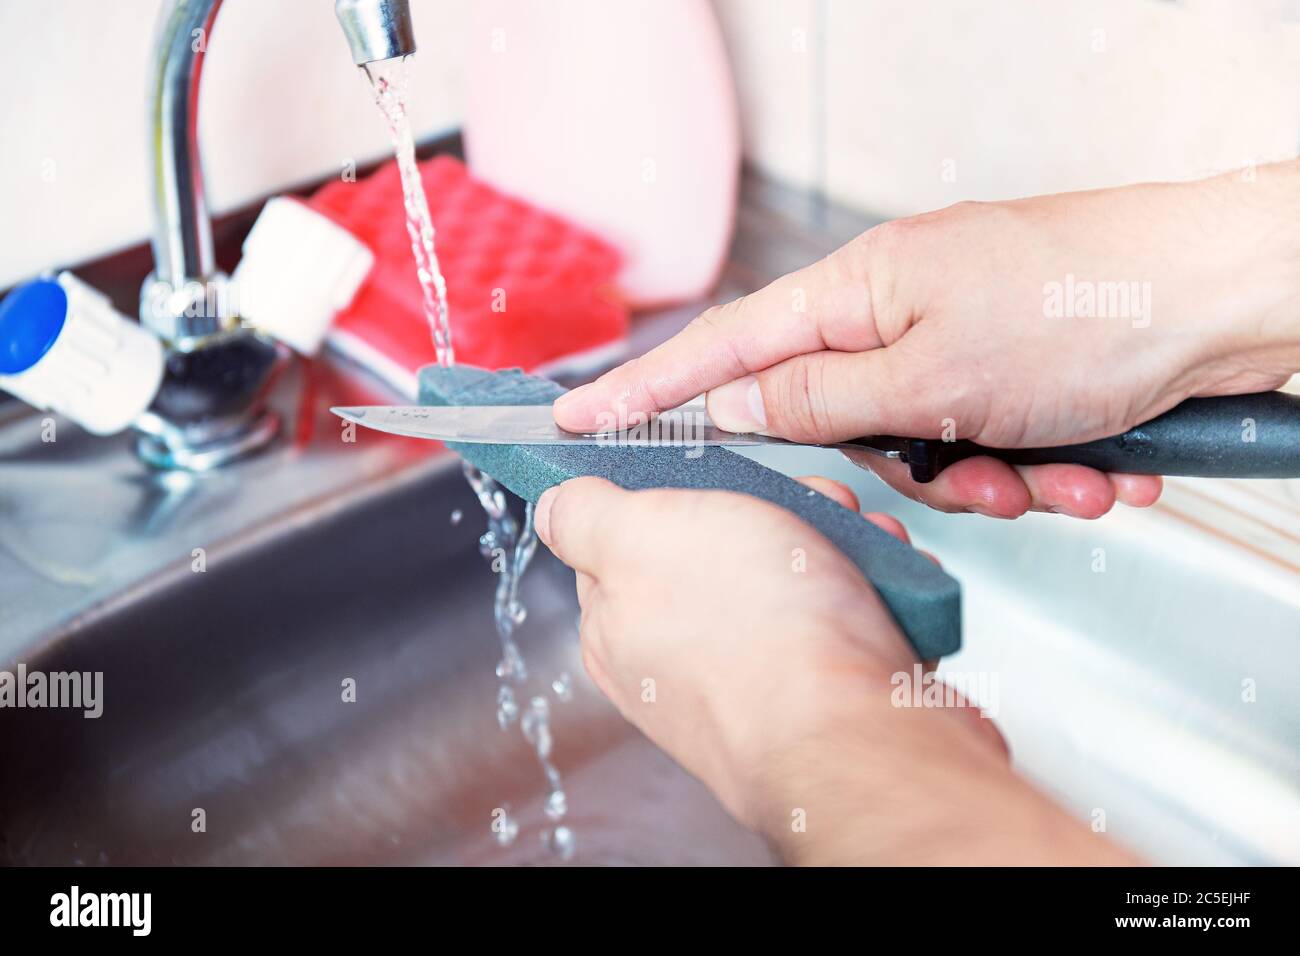 Close-up hands of a man carefully manual sharpen a knife under a stream of water on a grindstone. Home household sharpening. Care for kitchen cutlery. Stock Photo